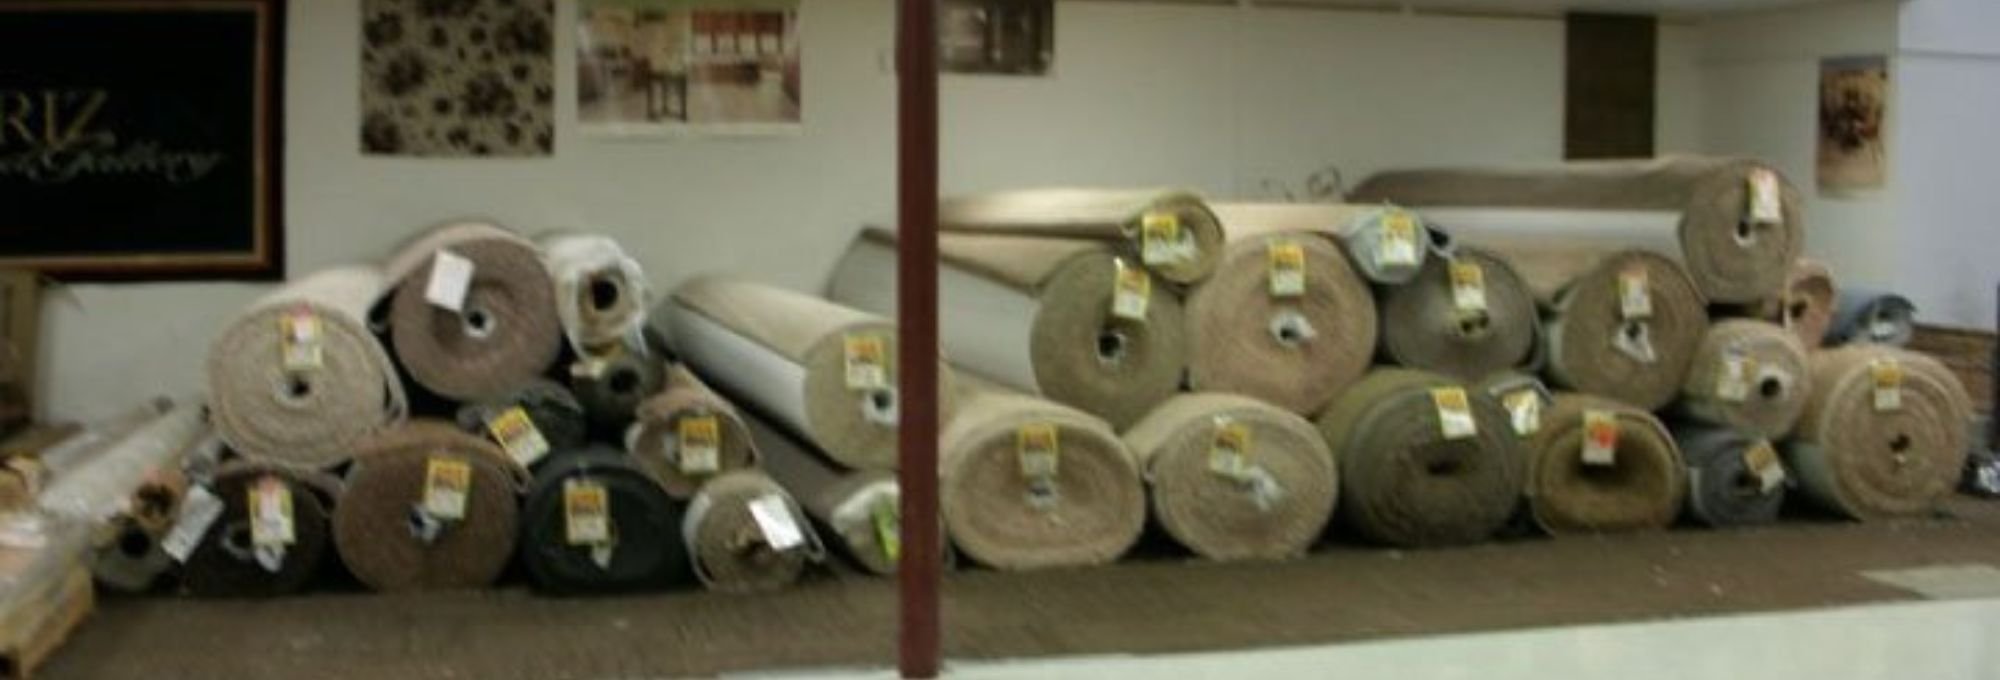 Rolls of carpet in showroom from Carpet Plus in the Worthington, MN area